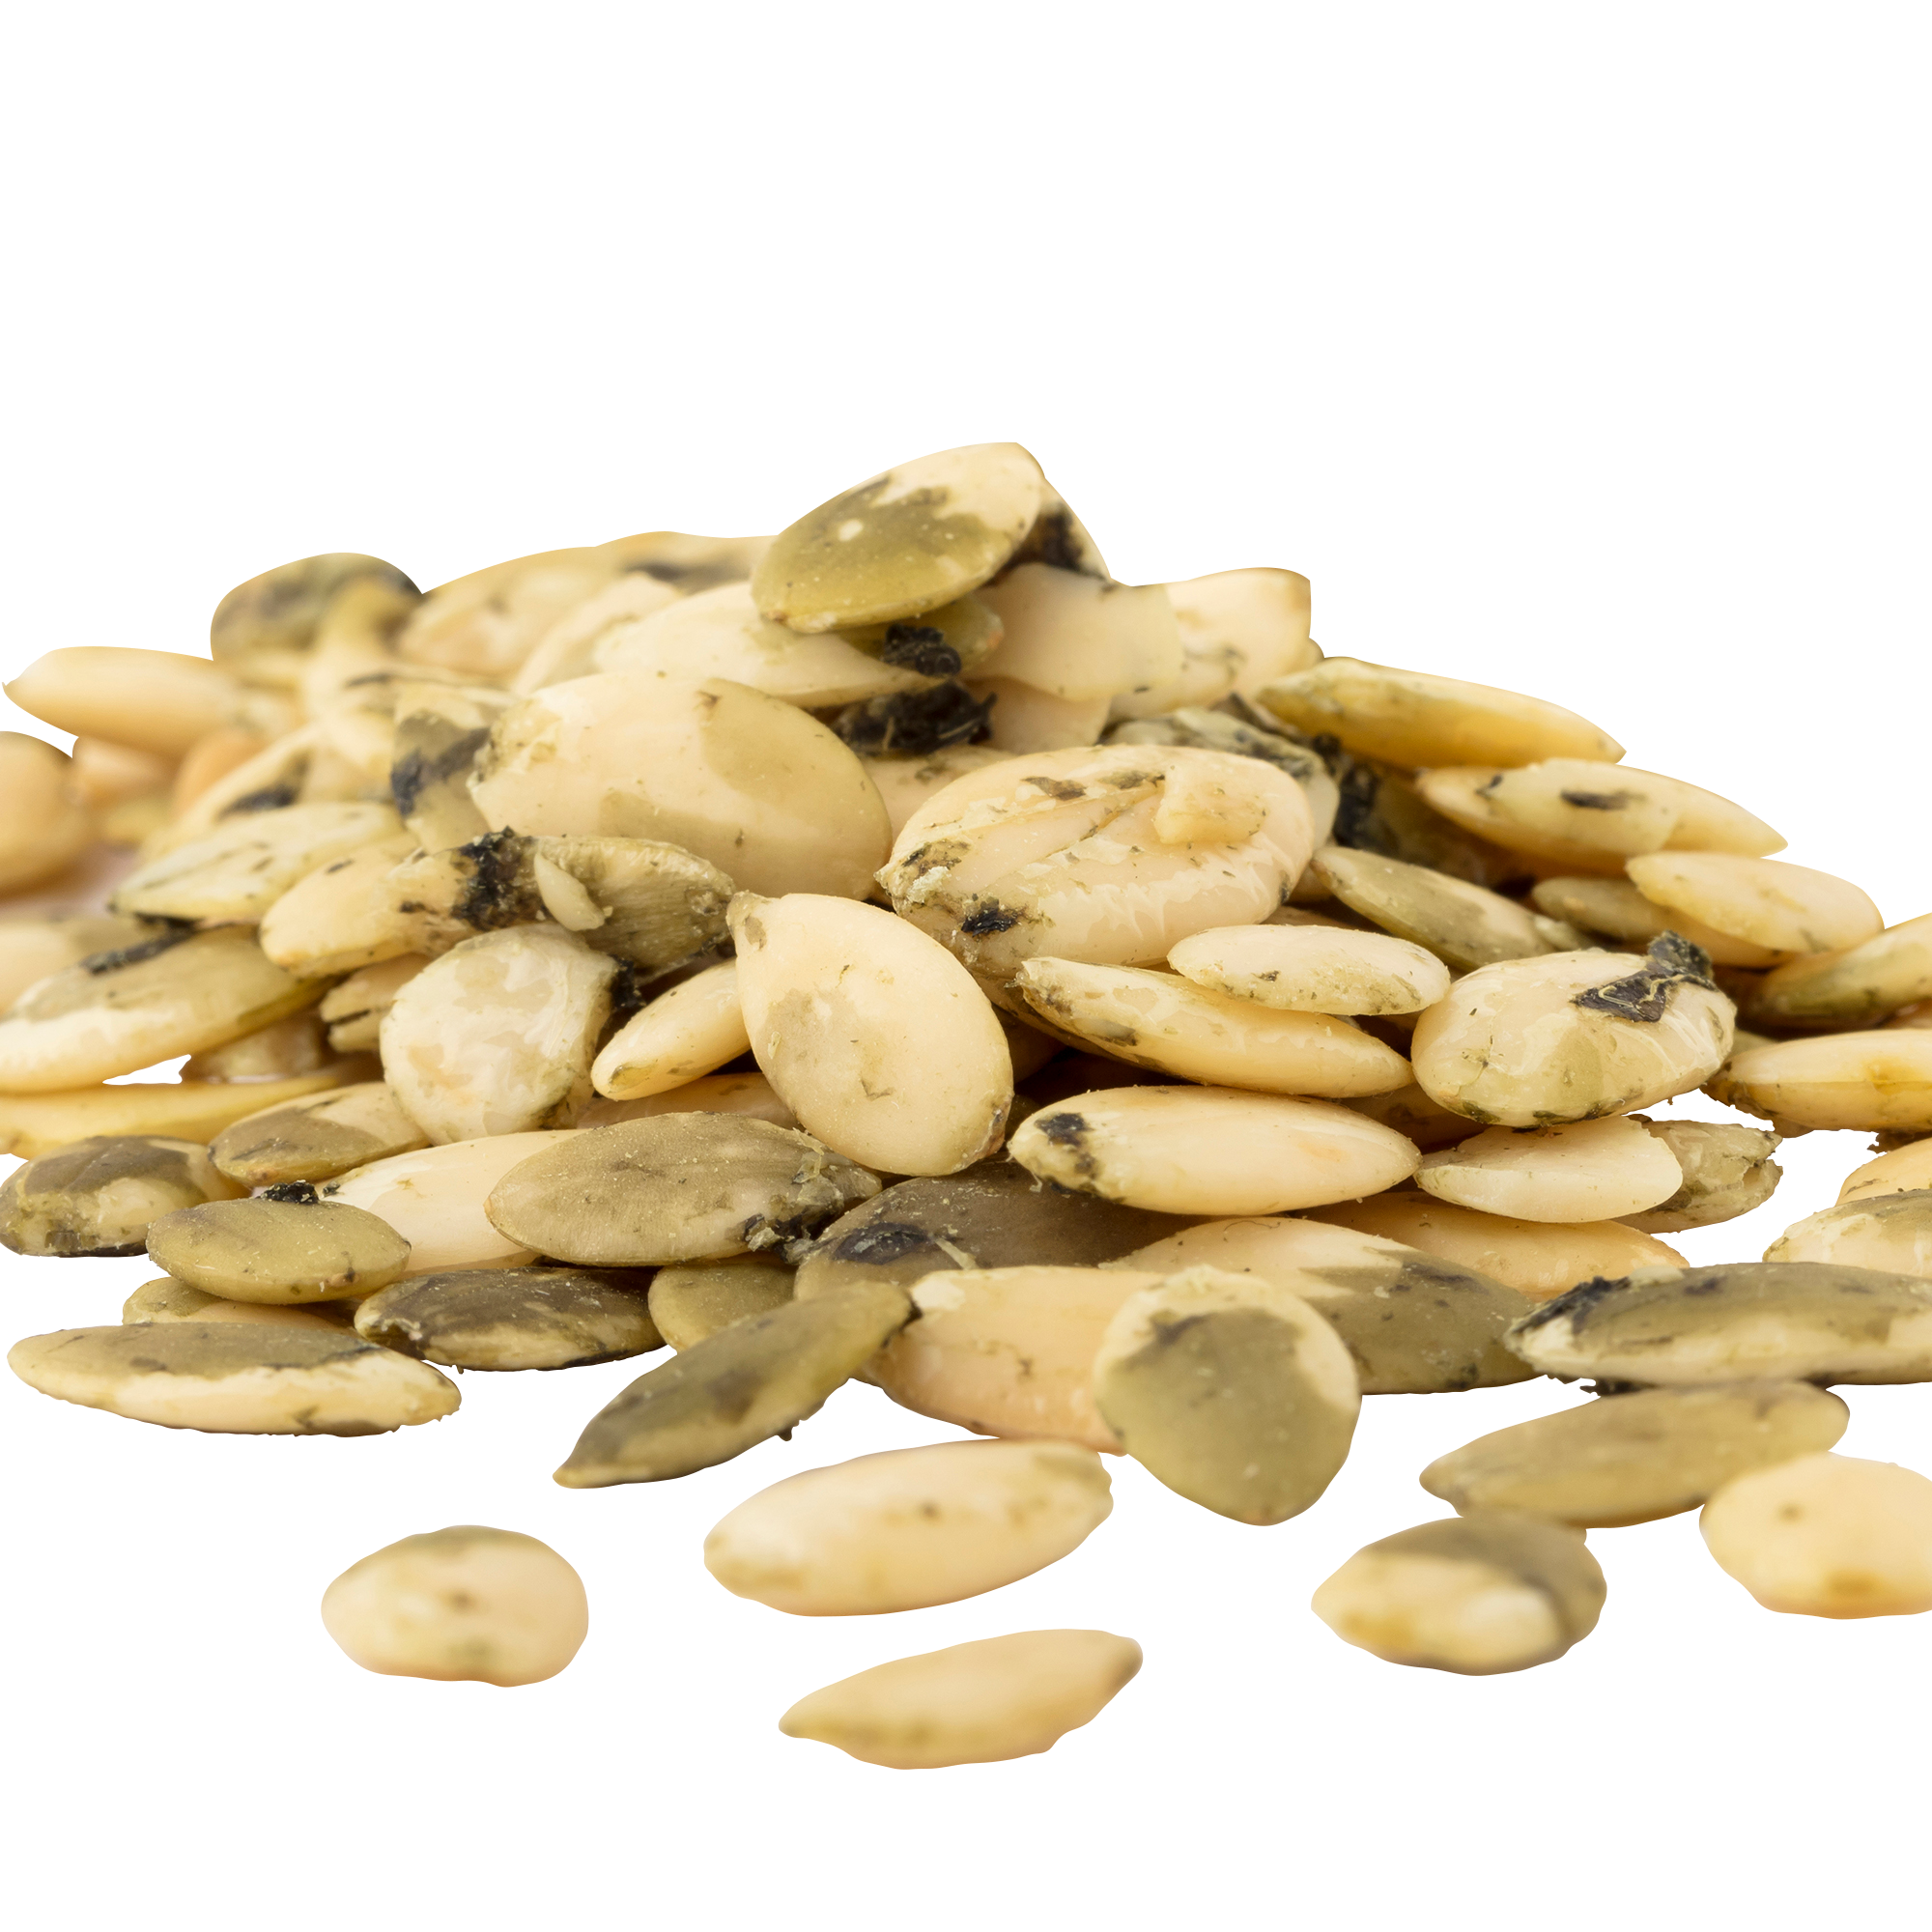 Sprouted Pumpkin Seeds - 6 Bags, 10 oz Each